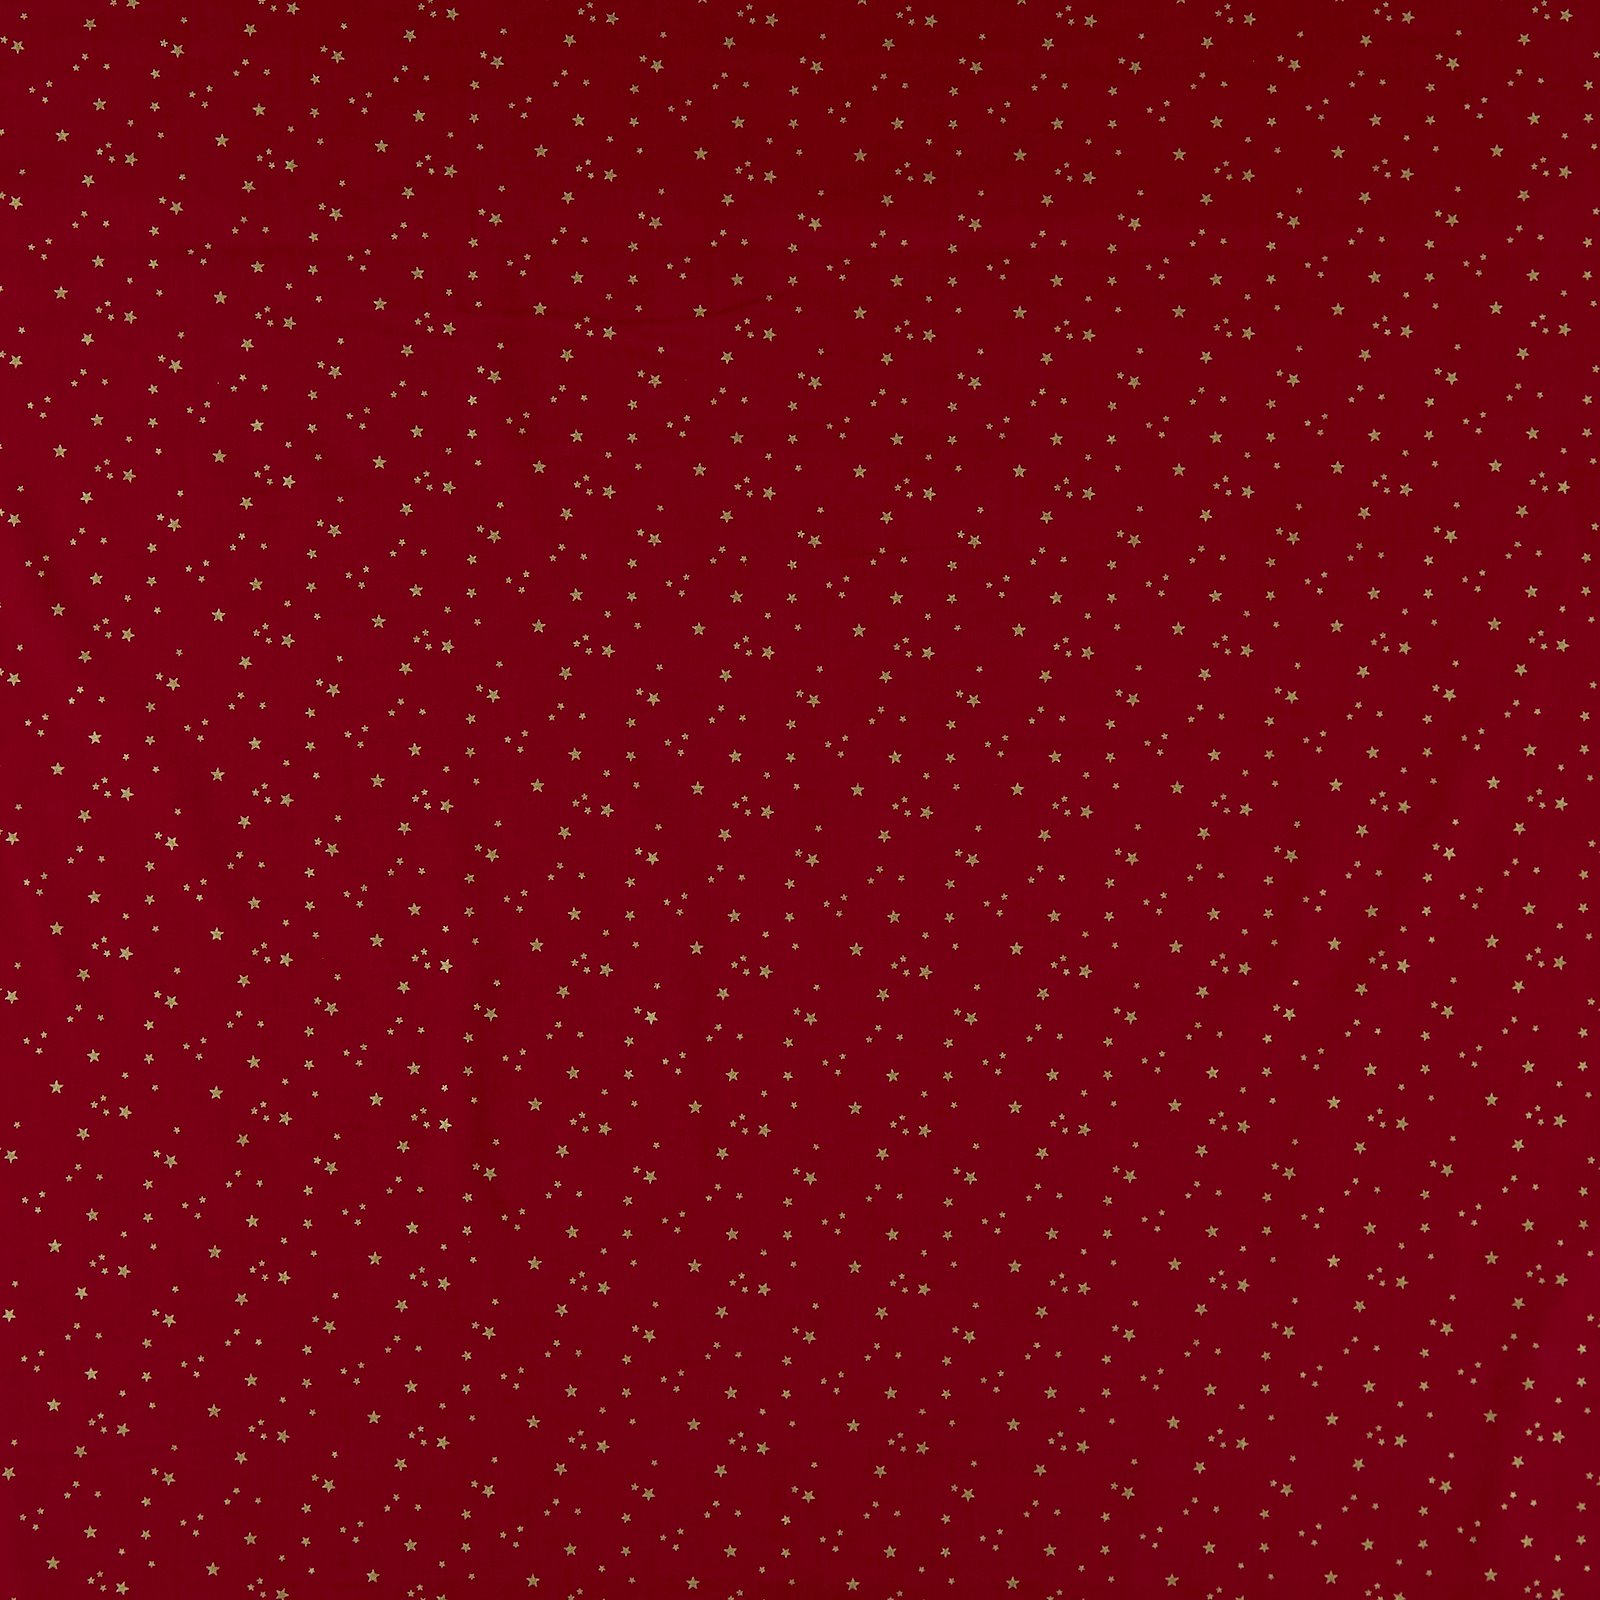 Cotton red w gold stars 790147_pack_sp